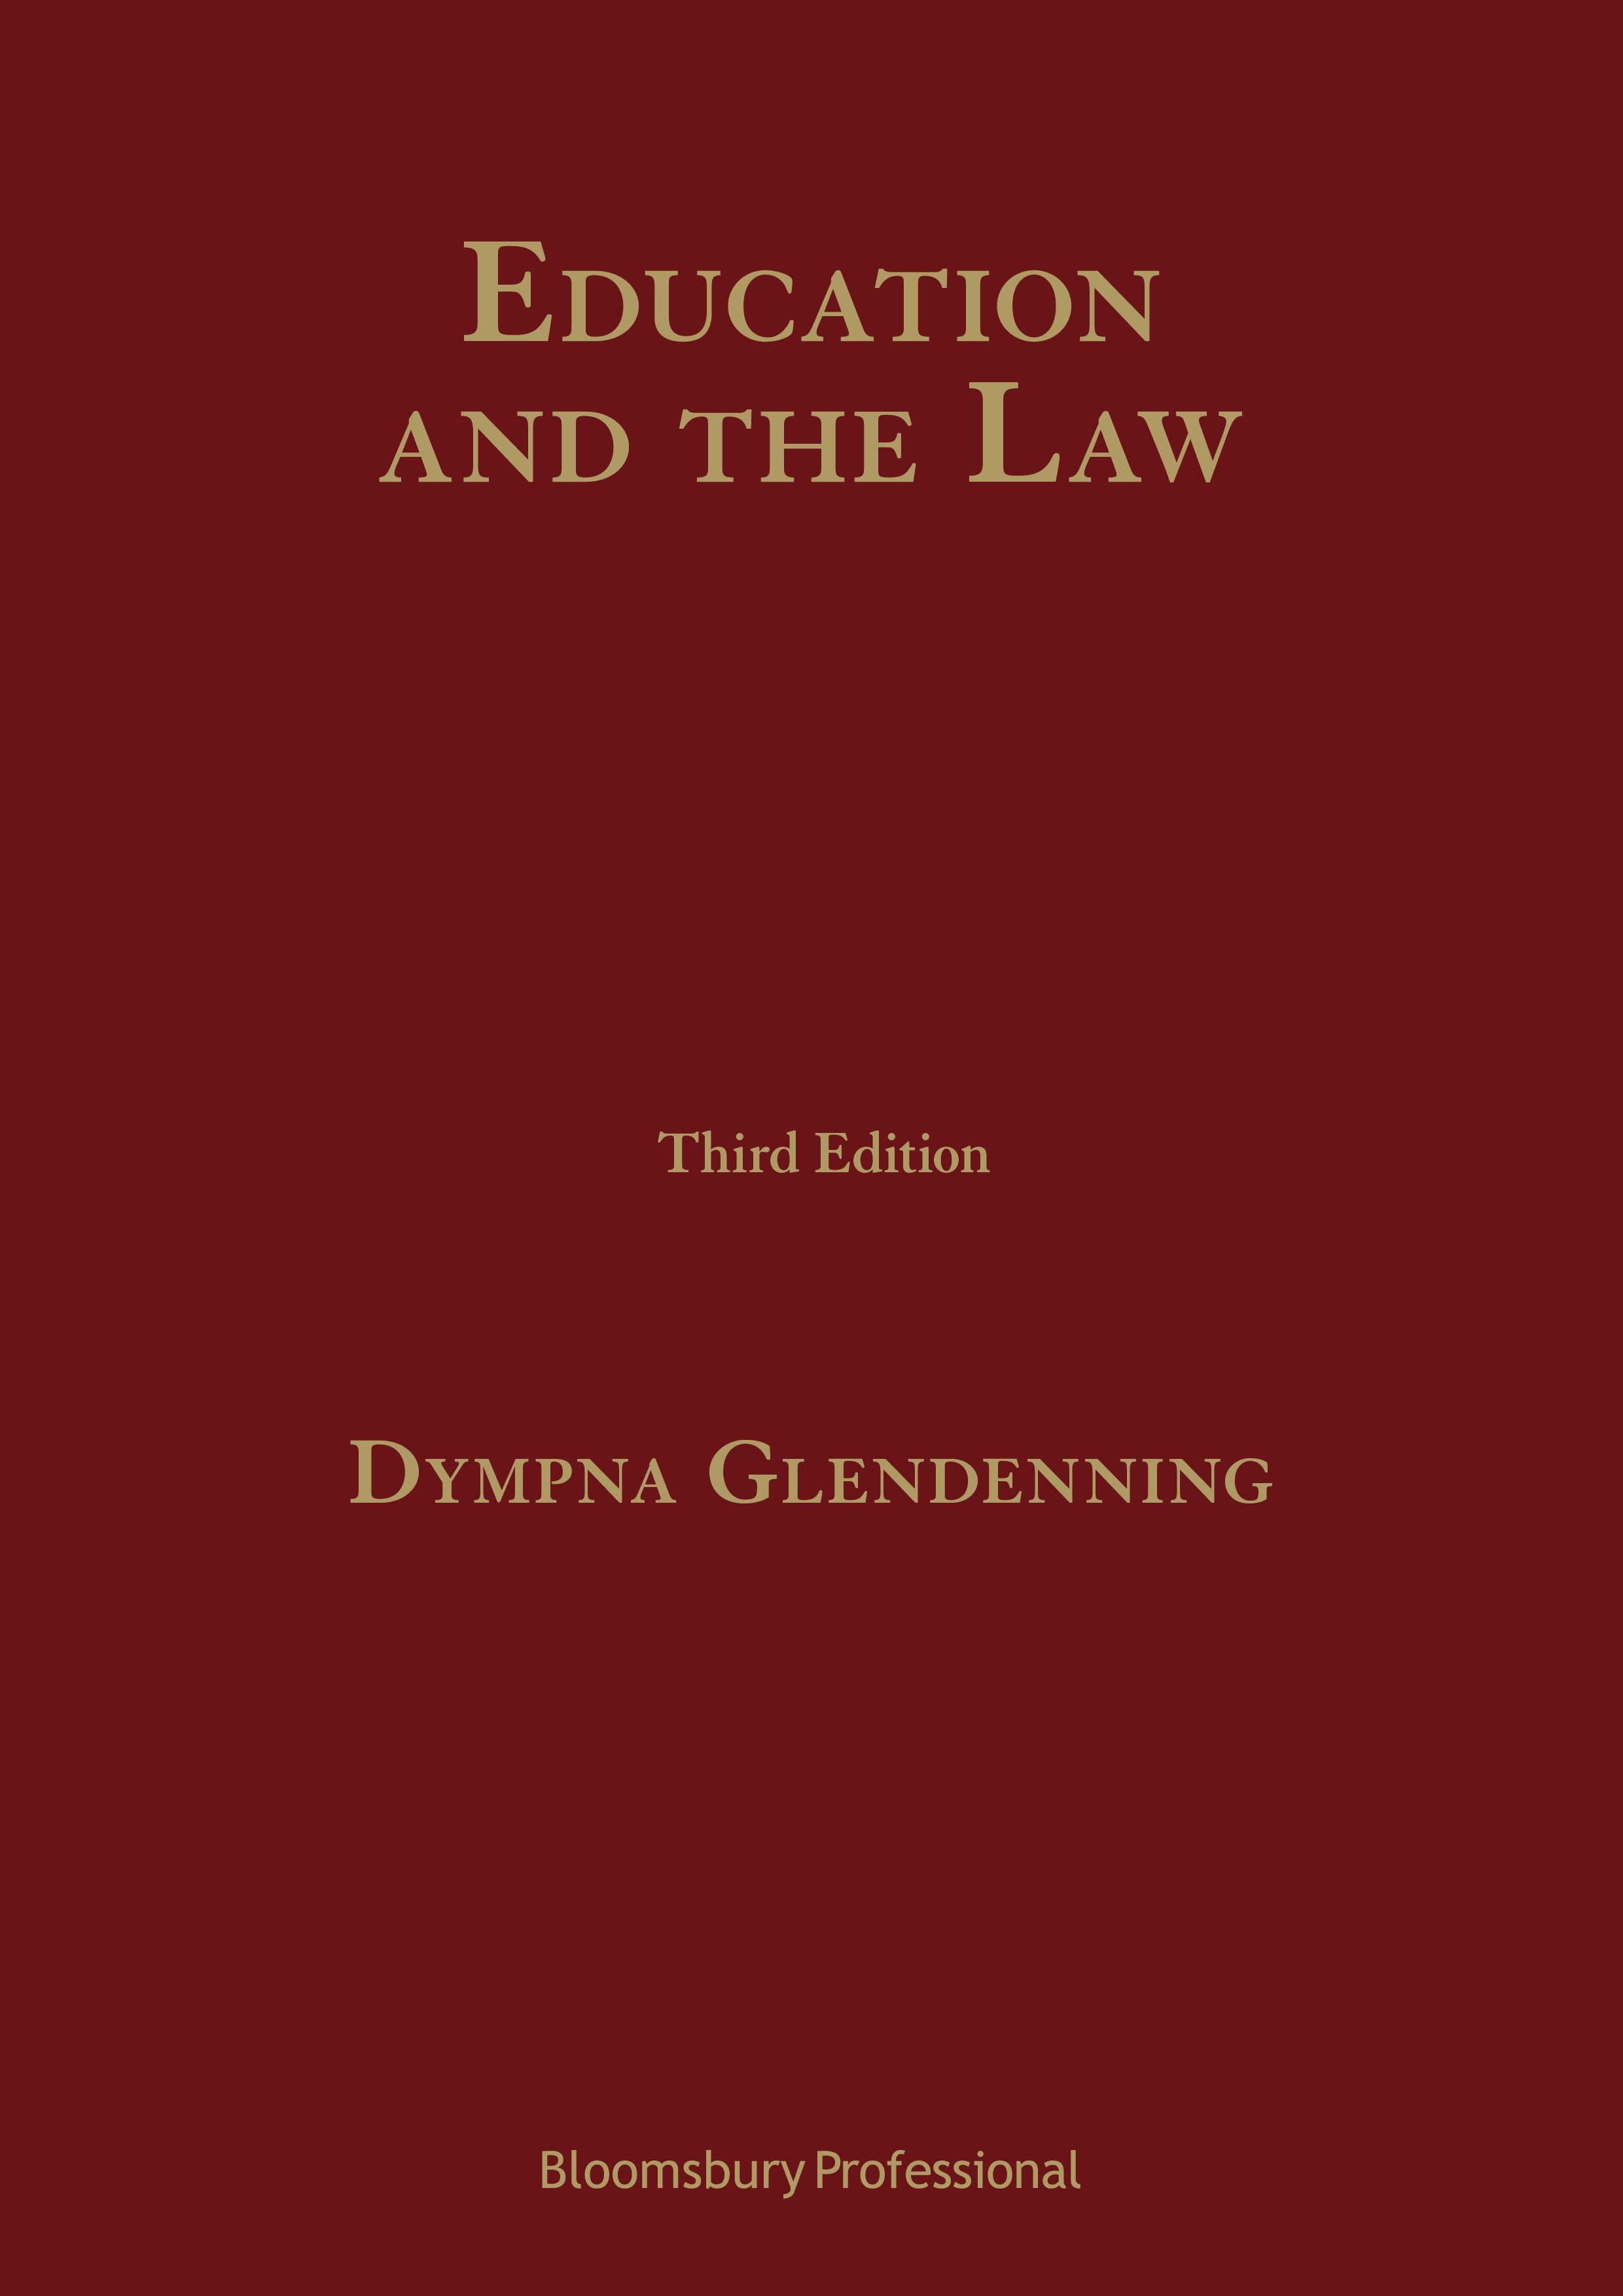 Education and the Law book jacket